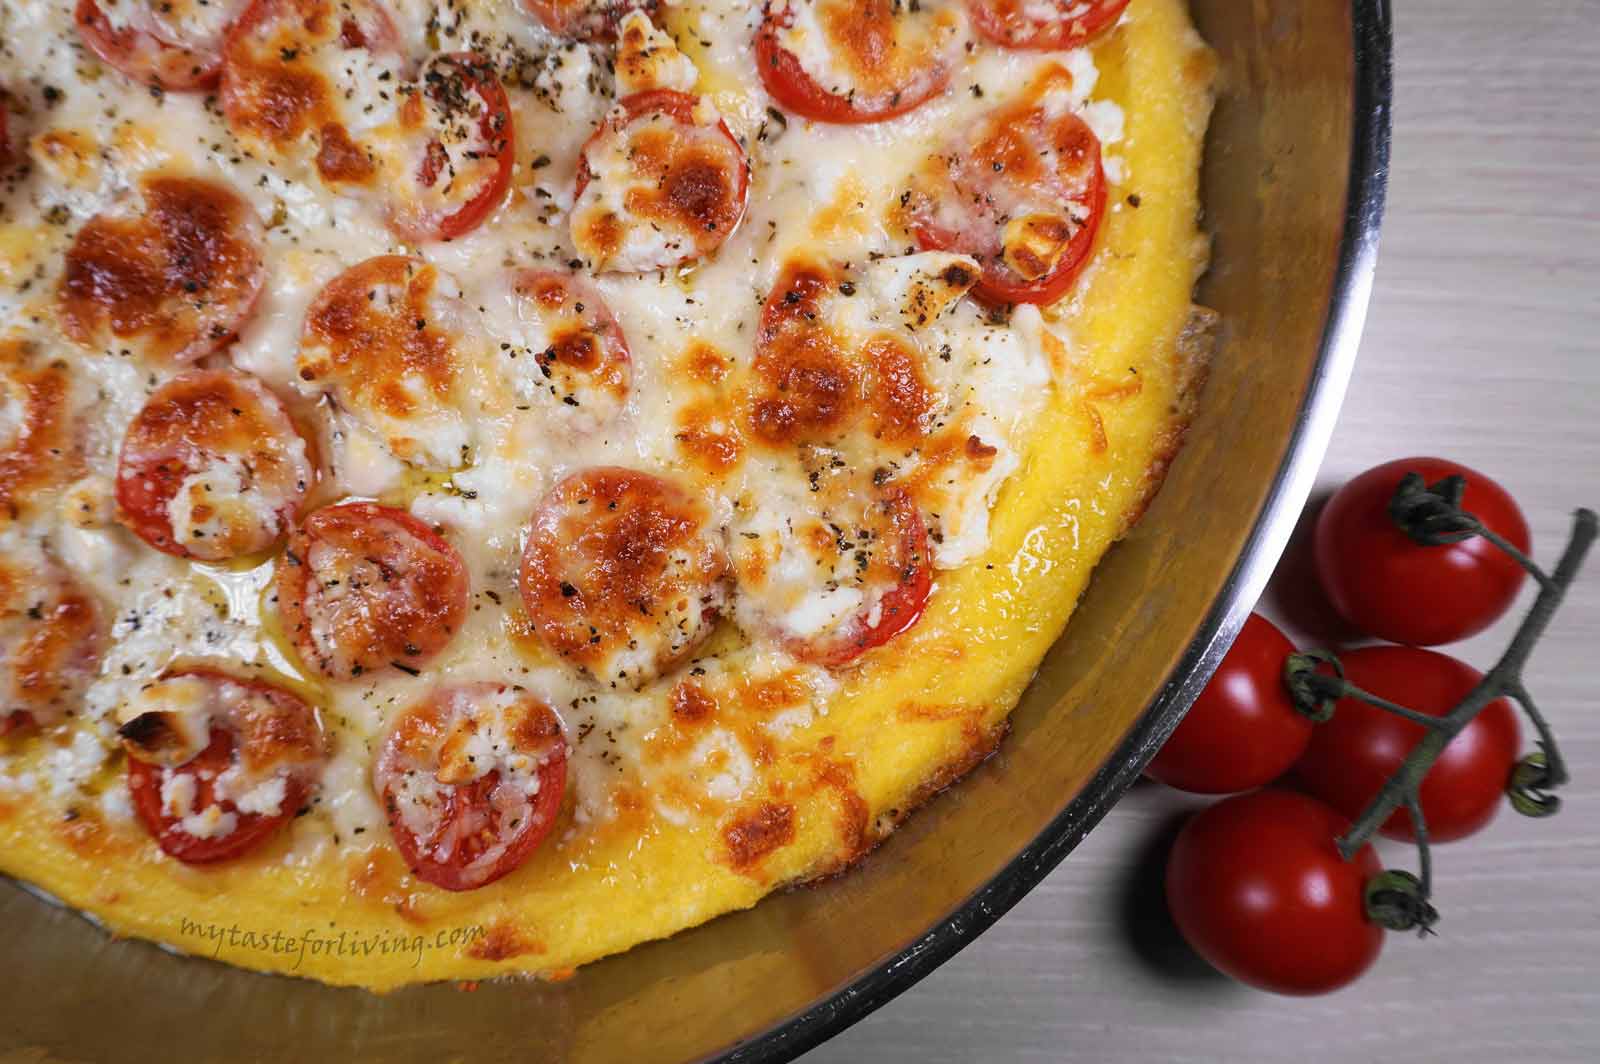 To diversify the menu with delicious baked polenta with tomatoes, feta cheese and yellow cheese (mozzarella or cheddar) seasoned with basil.